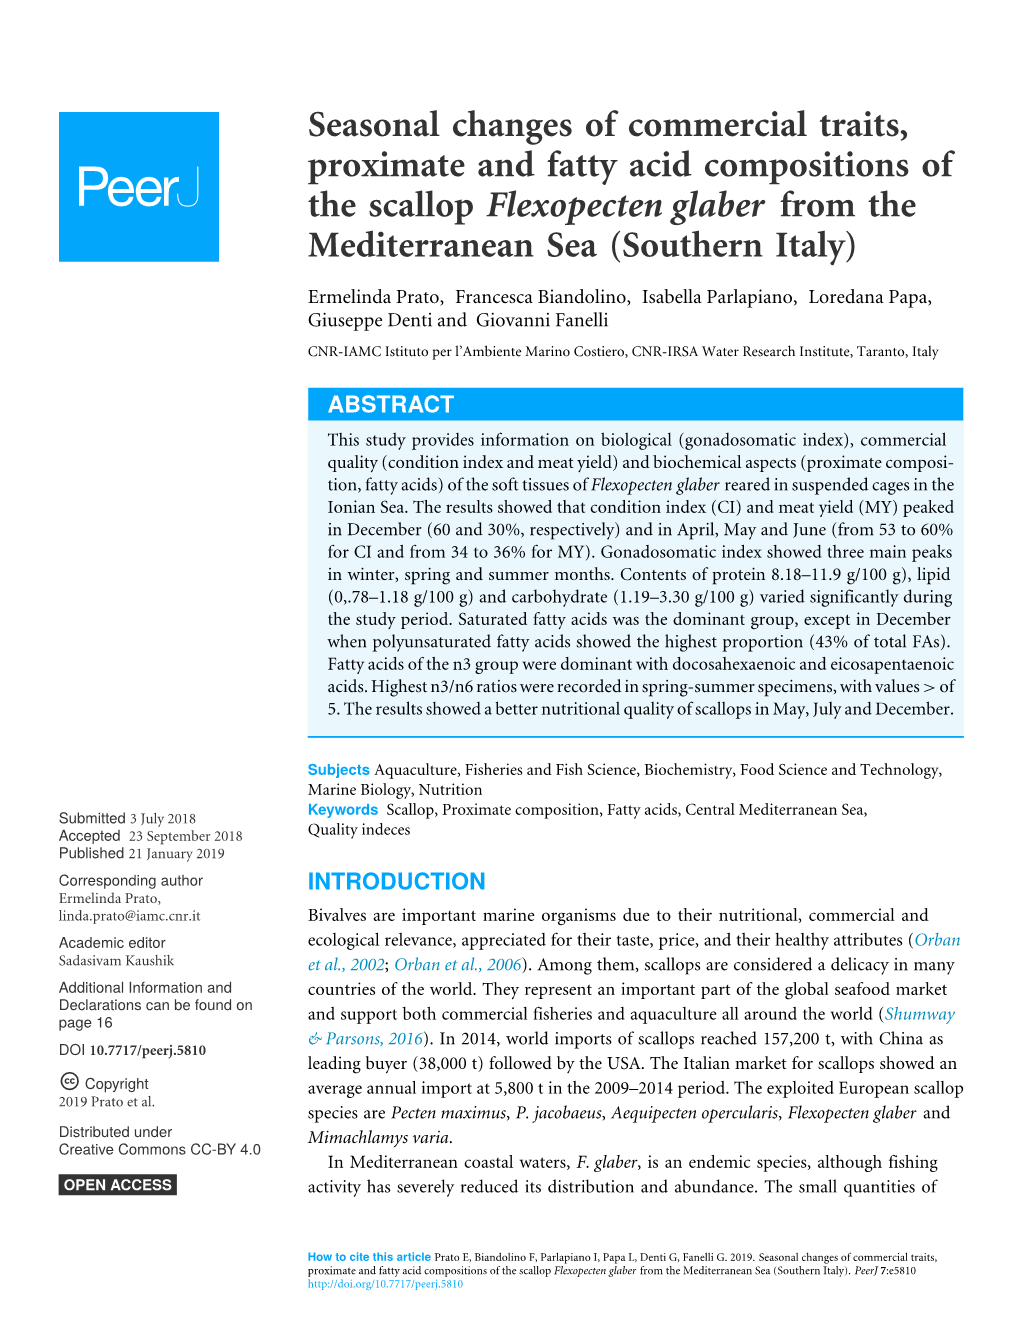 Seasonal Changes of Commercial Traits, Proximate and Fatty Acid Compositions of the Scallop Flexopecten Glaber from the Mediterranean Sea (Southern Italy)